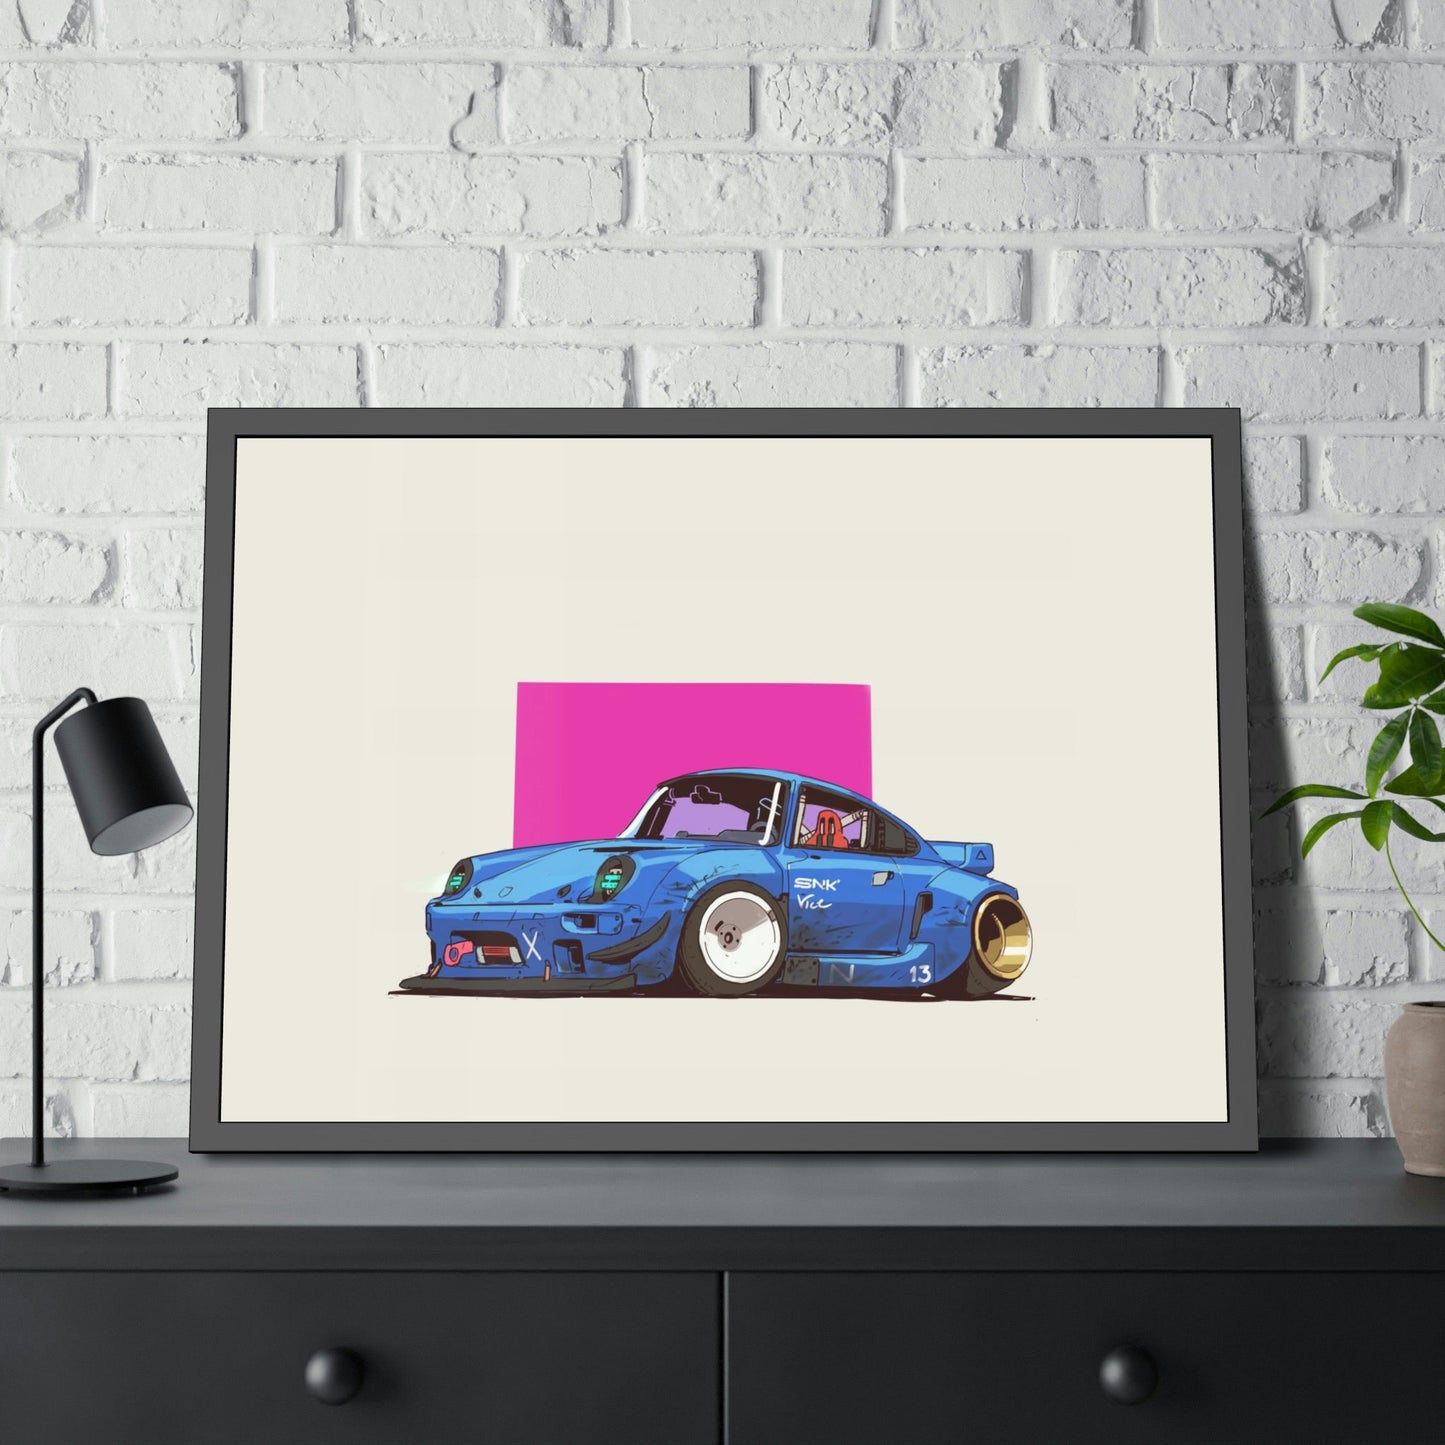 Vintage Porsche Charm: Framed Posters and Canvas Prints